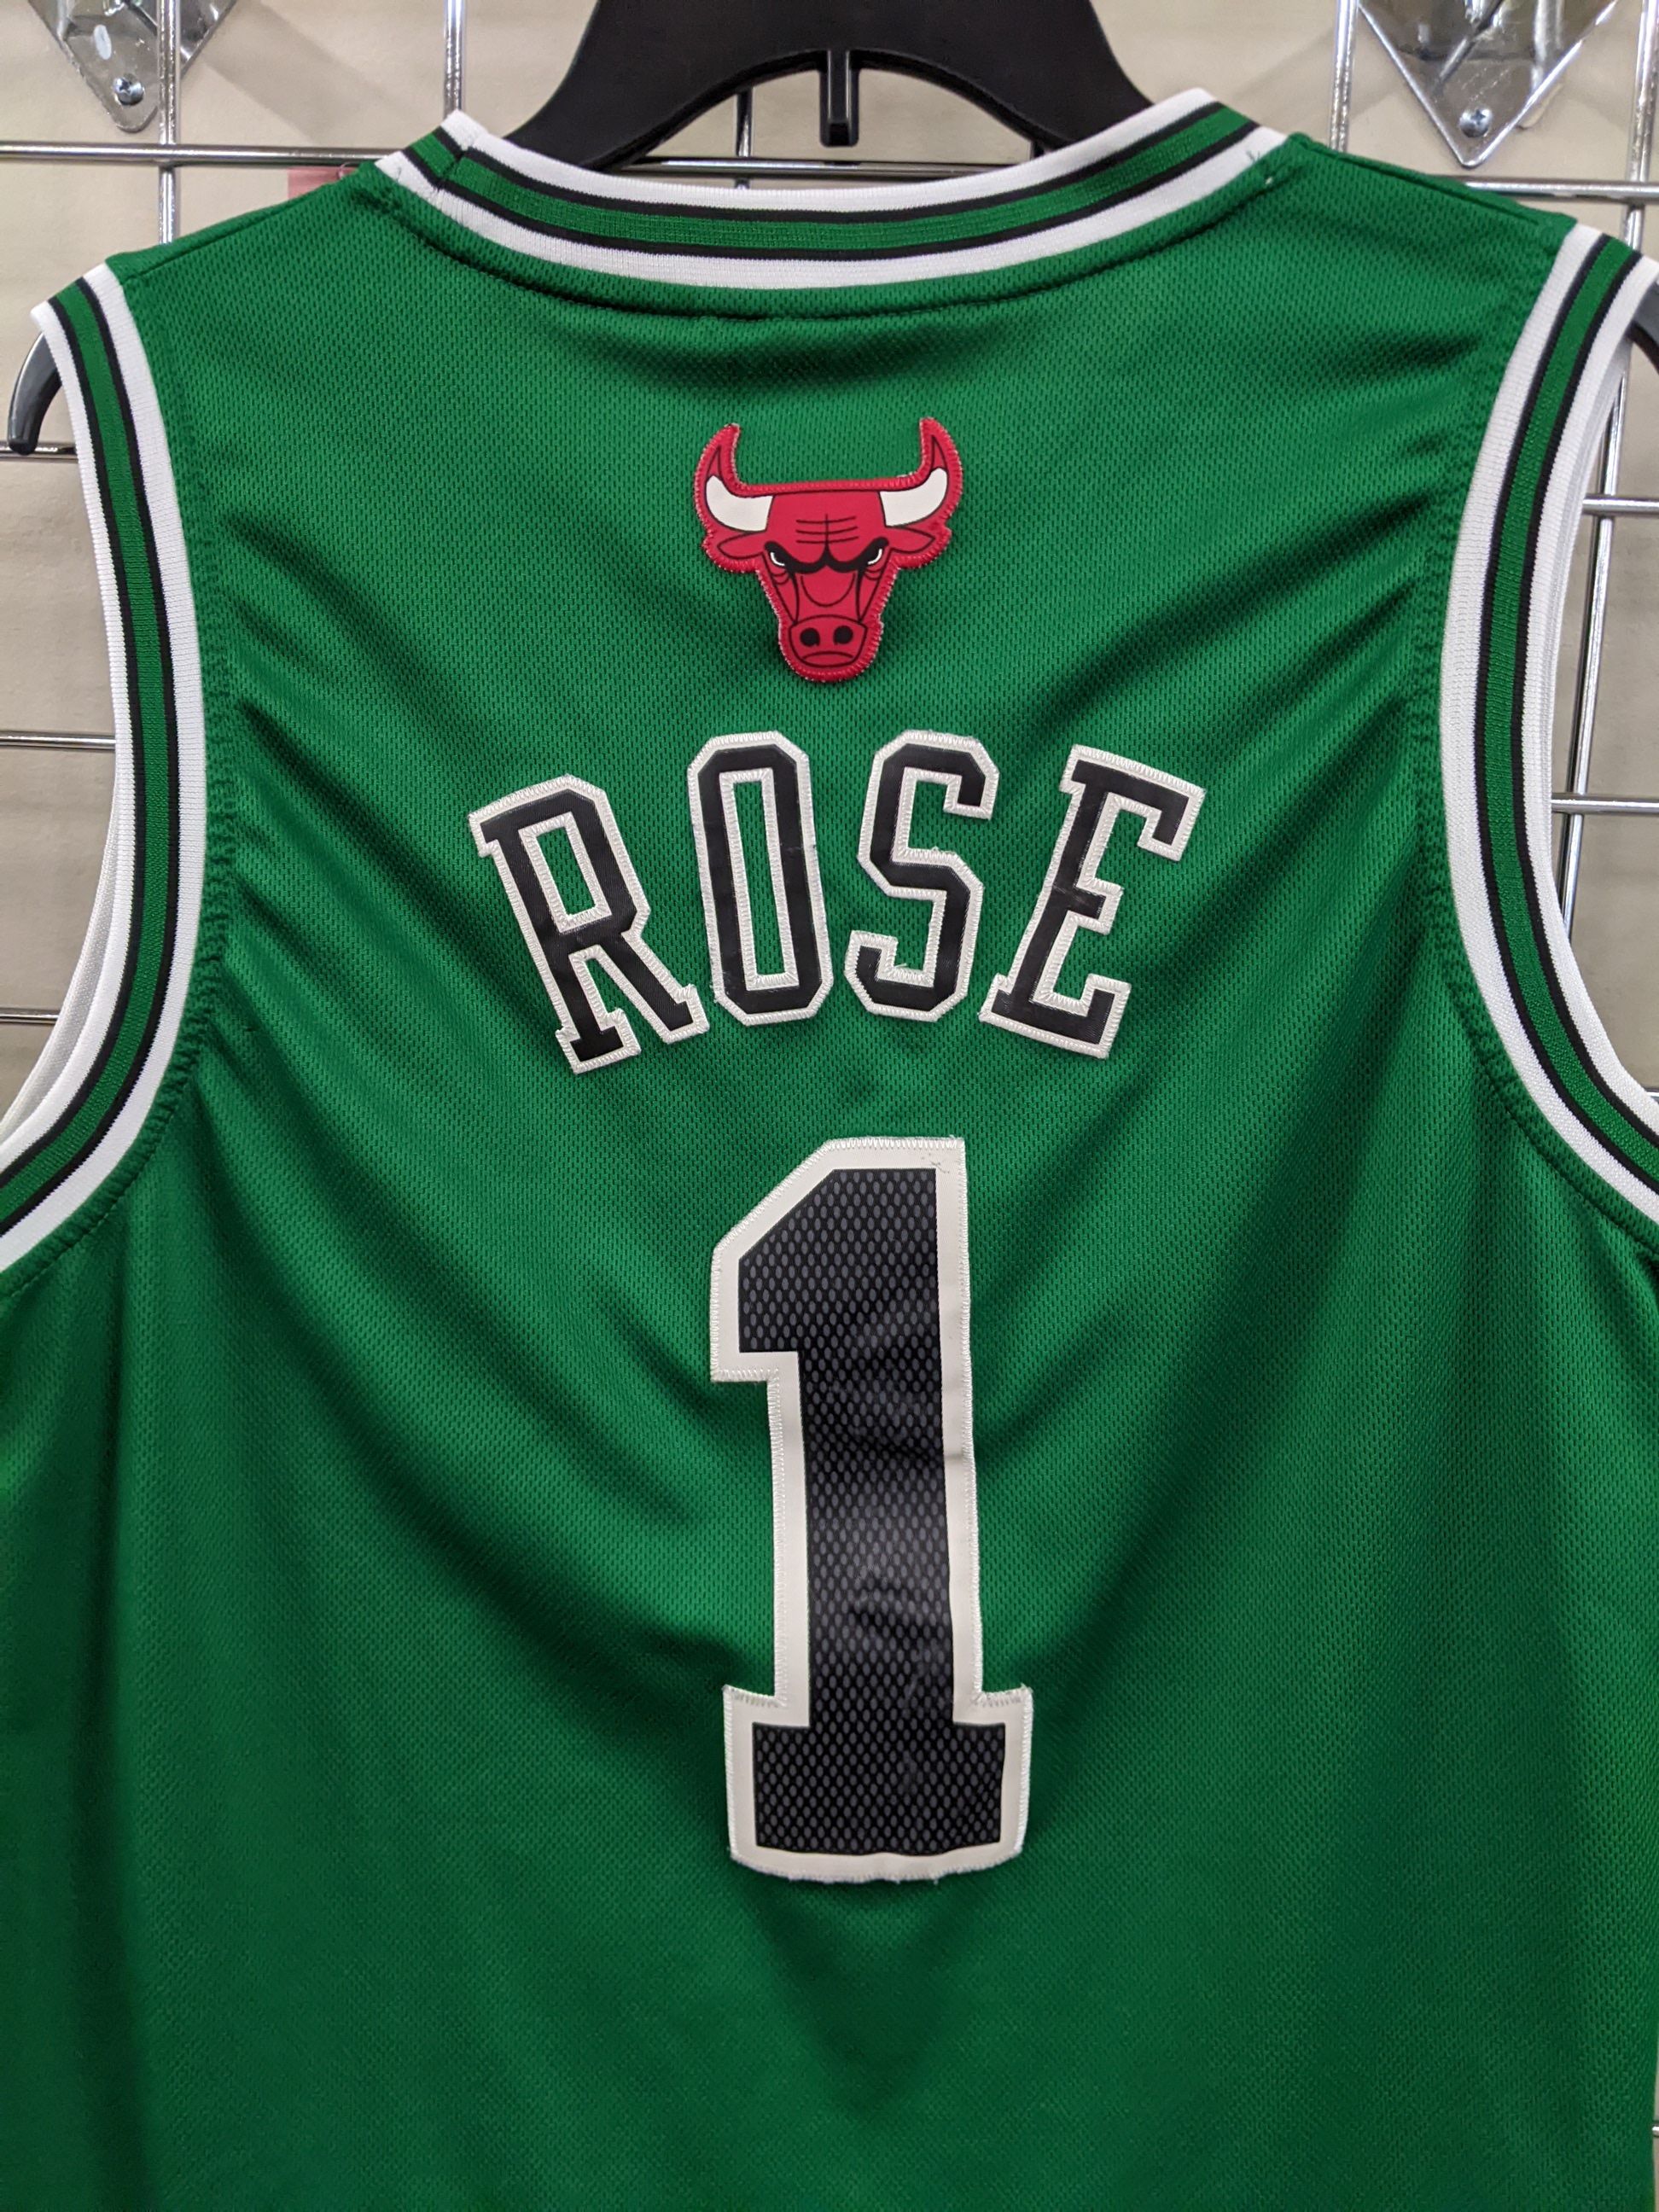 Adidas Adidas Derick Rose St. Patrick's Day Chicago Bulls Jersey Size US S / EU 44-46 / 1 - 2 Preview